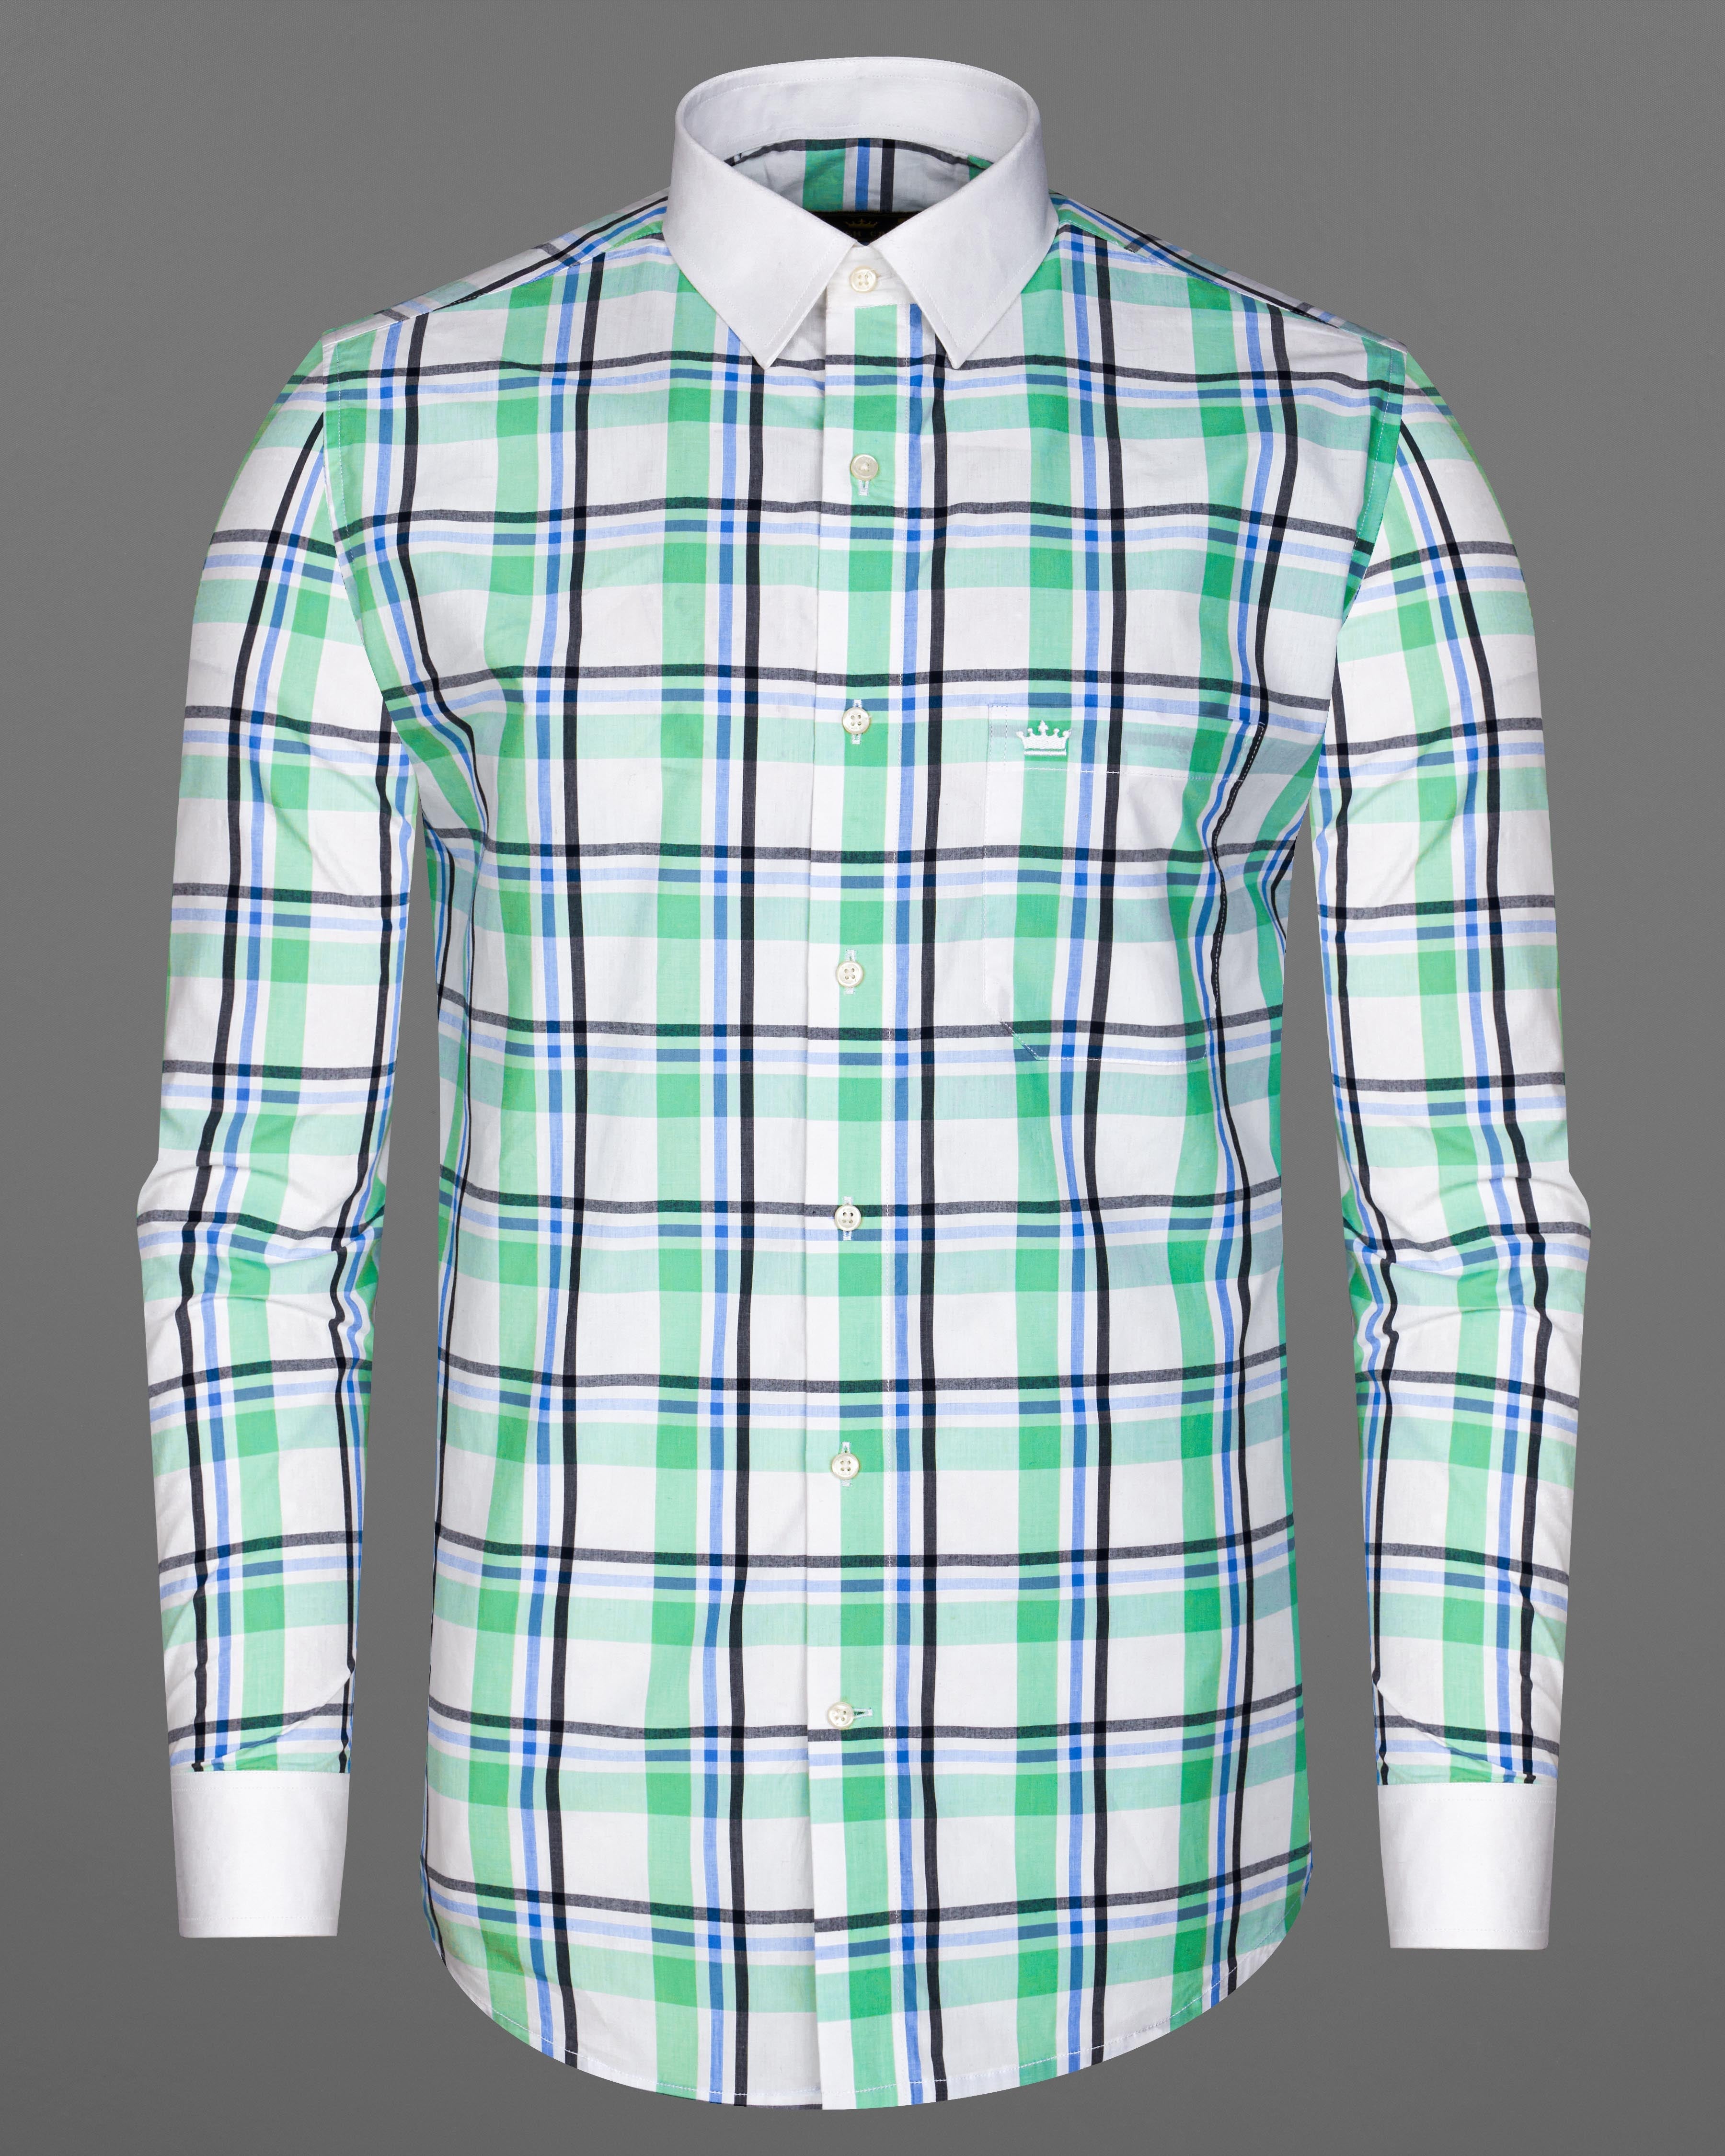 Bright White with Oxley Green and Black Windowpane Premium Cotton Shirt 8711-WCC-38, 8711-WCC-H-38, 8711-WCC-39, 8711-WCC-H-39, 8711-WCC-40, 8711-WCC-H-40, 8711-WCC-42, 8711-WCC-H-42, 8711-WCC-44, 8711-WCC-H-44, 8711-WCC-46, 8711-WCC-H-46, 8711-WCC-48, 8711-WCC-H-48, 8711-WCC-50, 8711-WCC-H-50, 8711-WCC-52, 8711-WCC-H-52